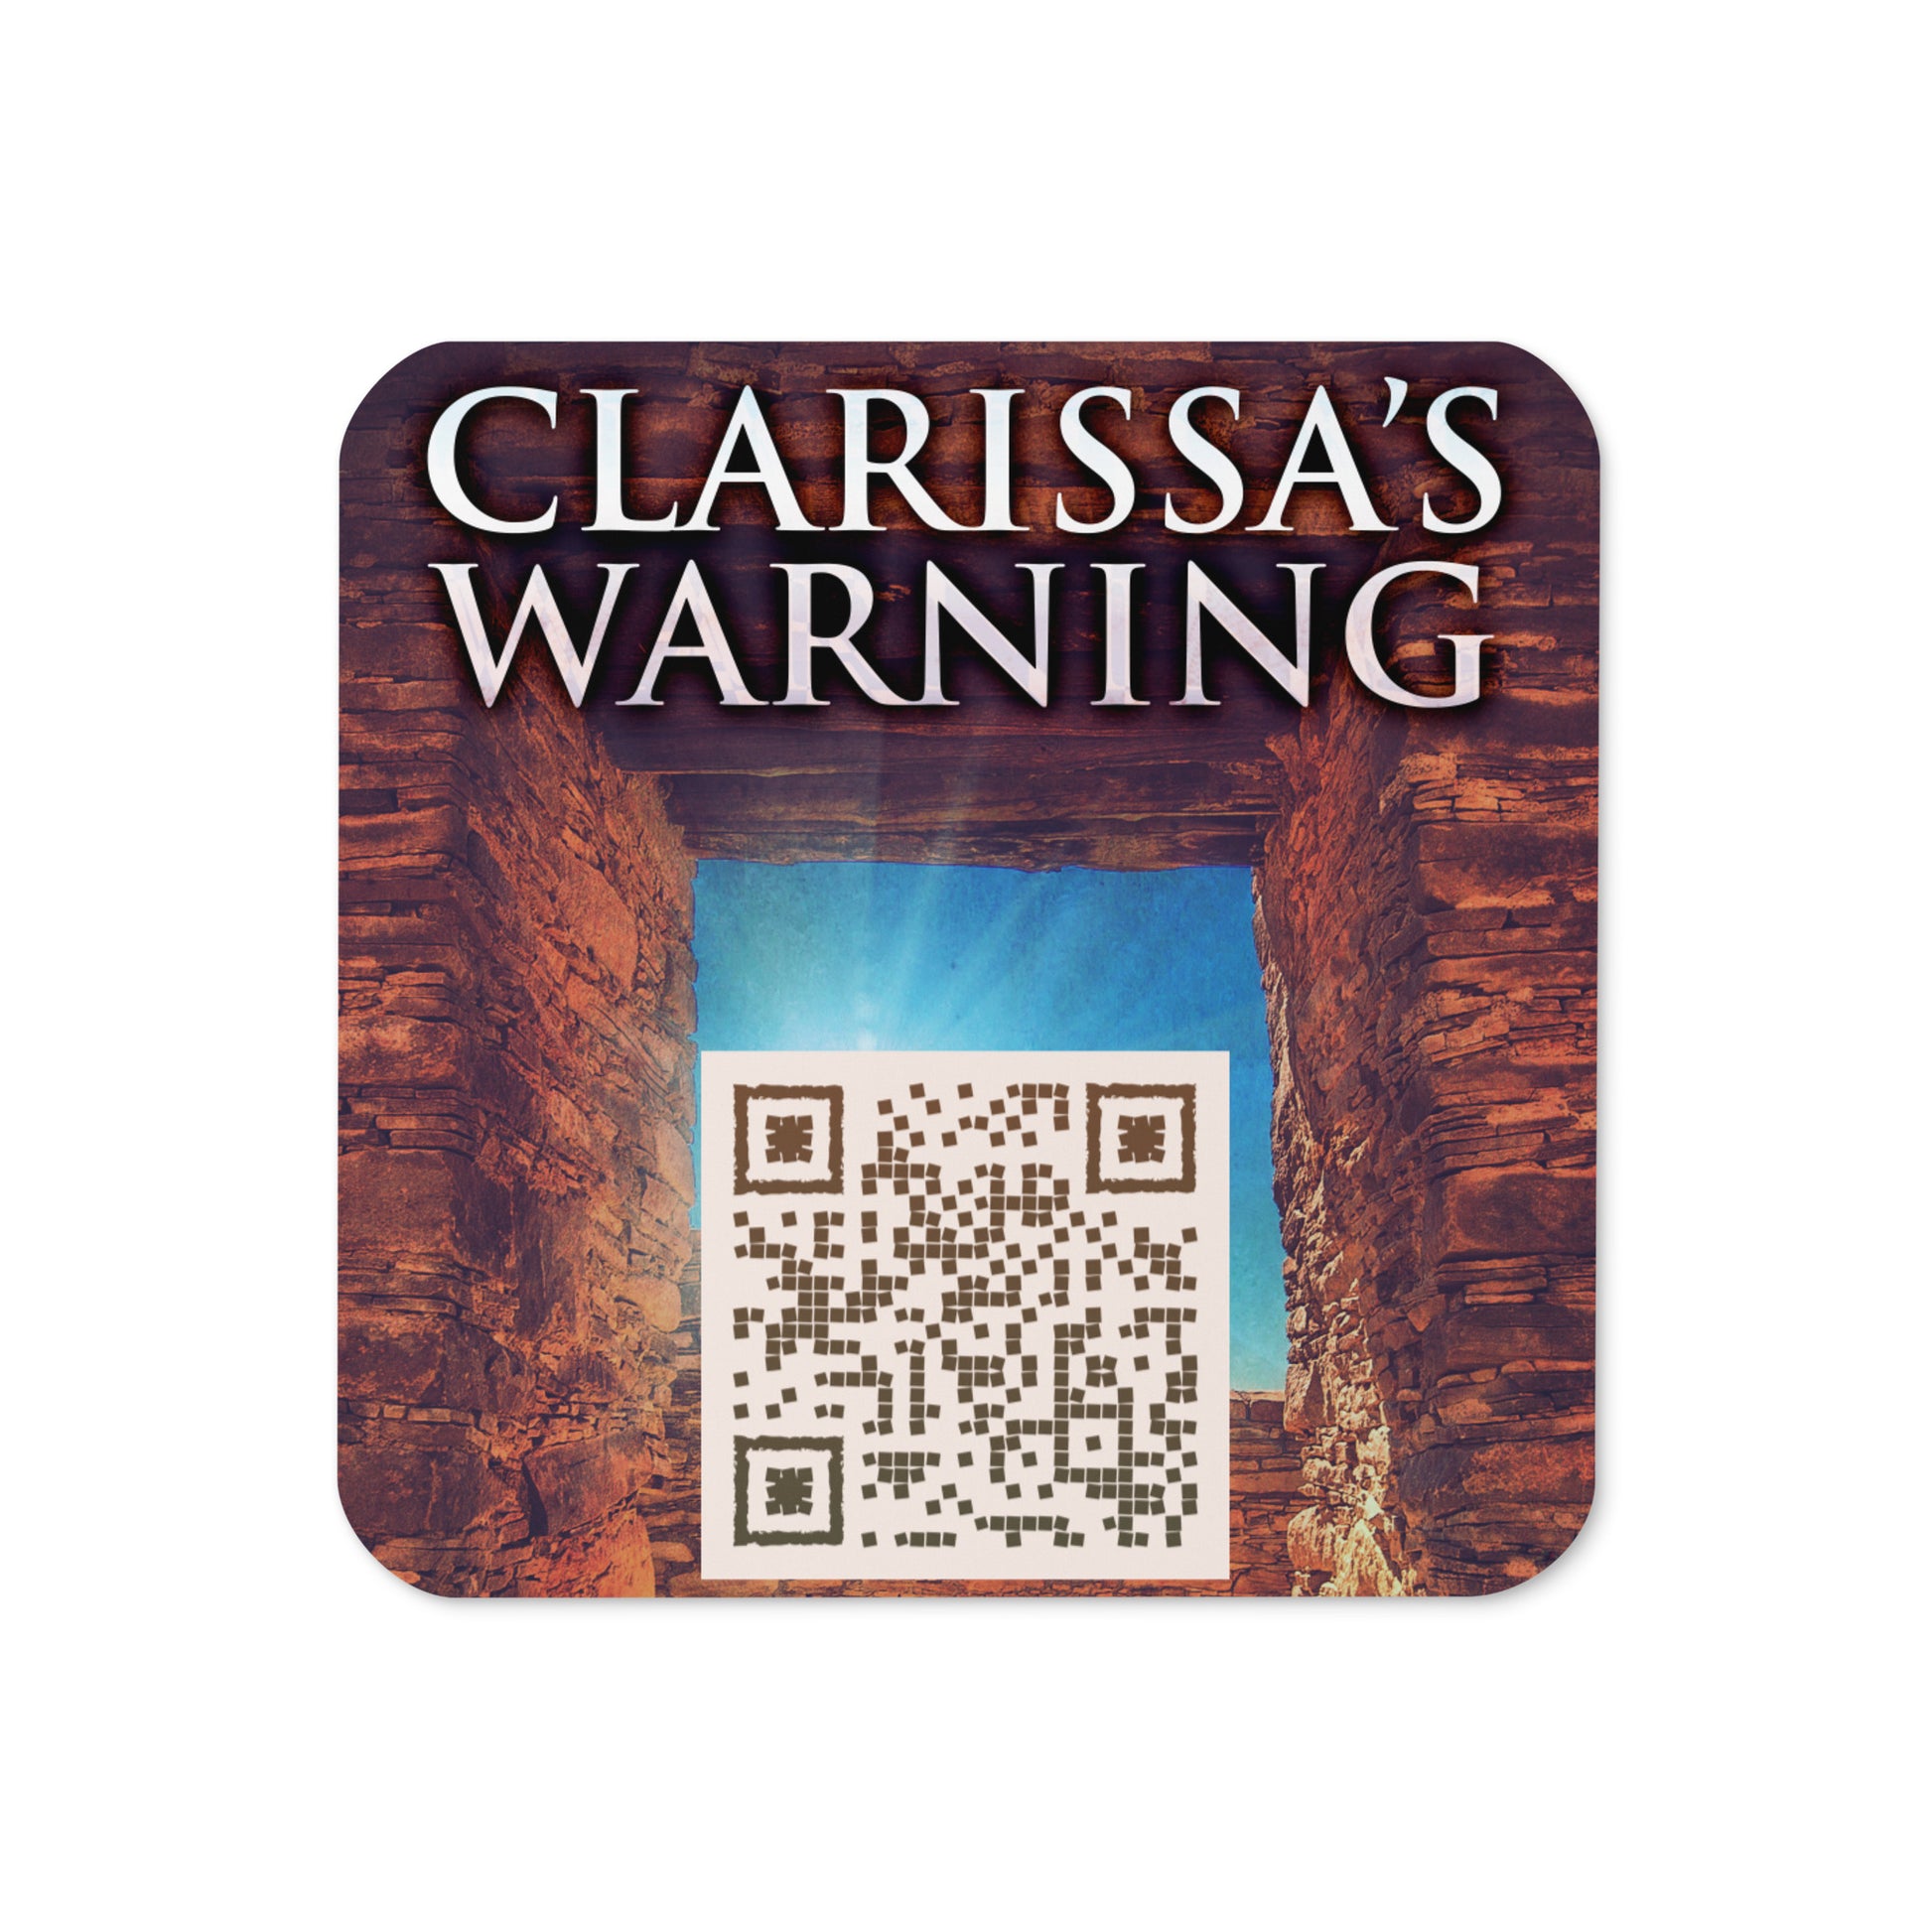 coaster with cover art from Isobel Blackthorn's book Clarissa's Warning